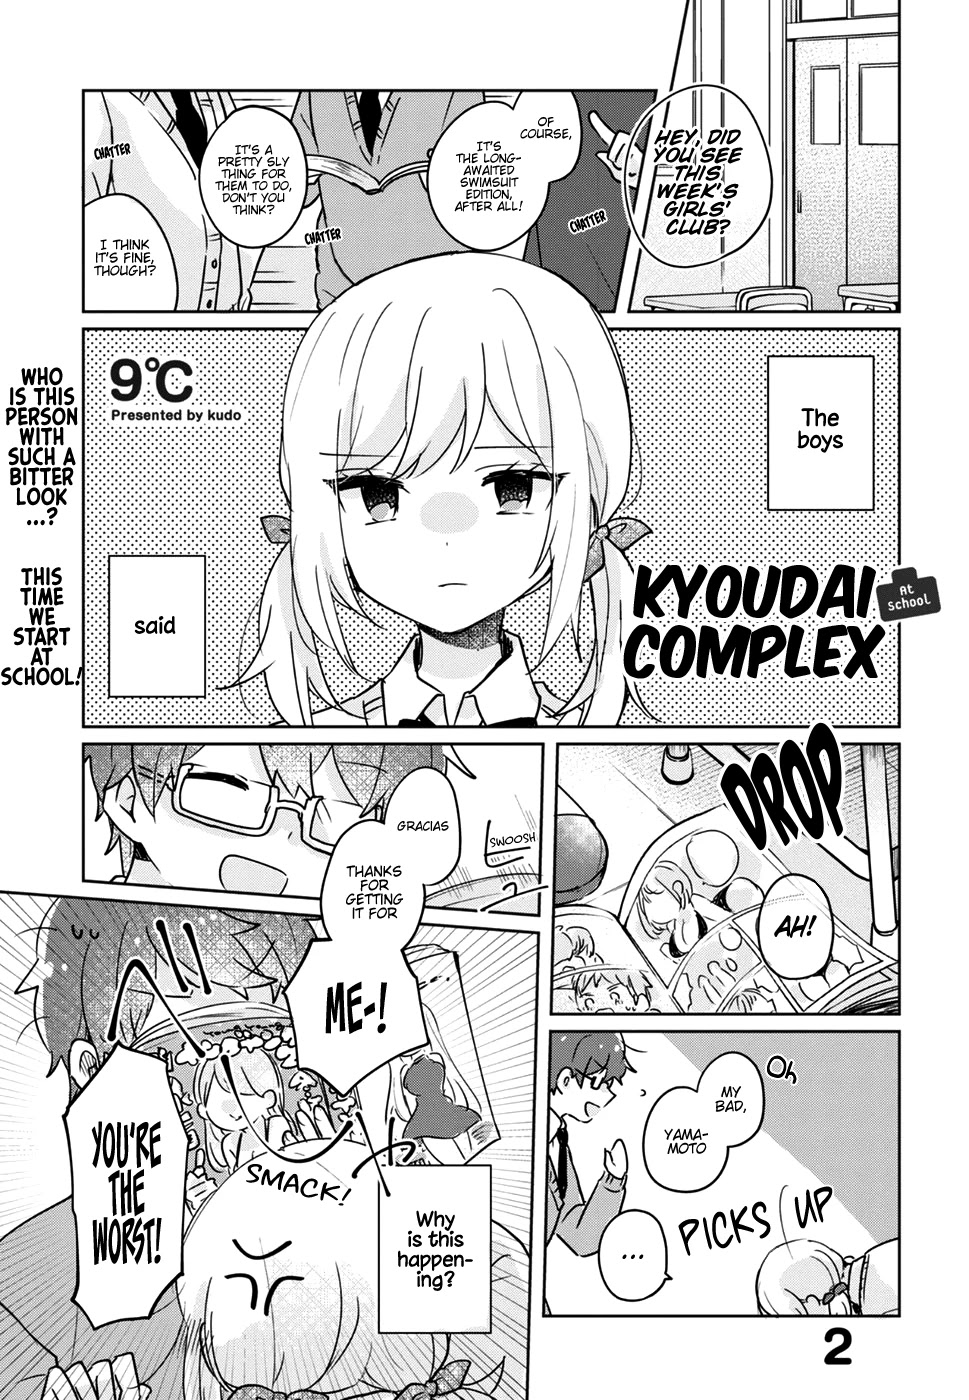 Kyoudai Complex - Page 2